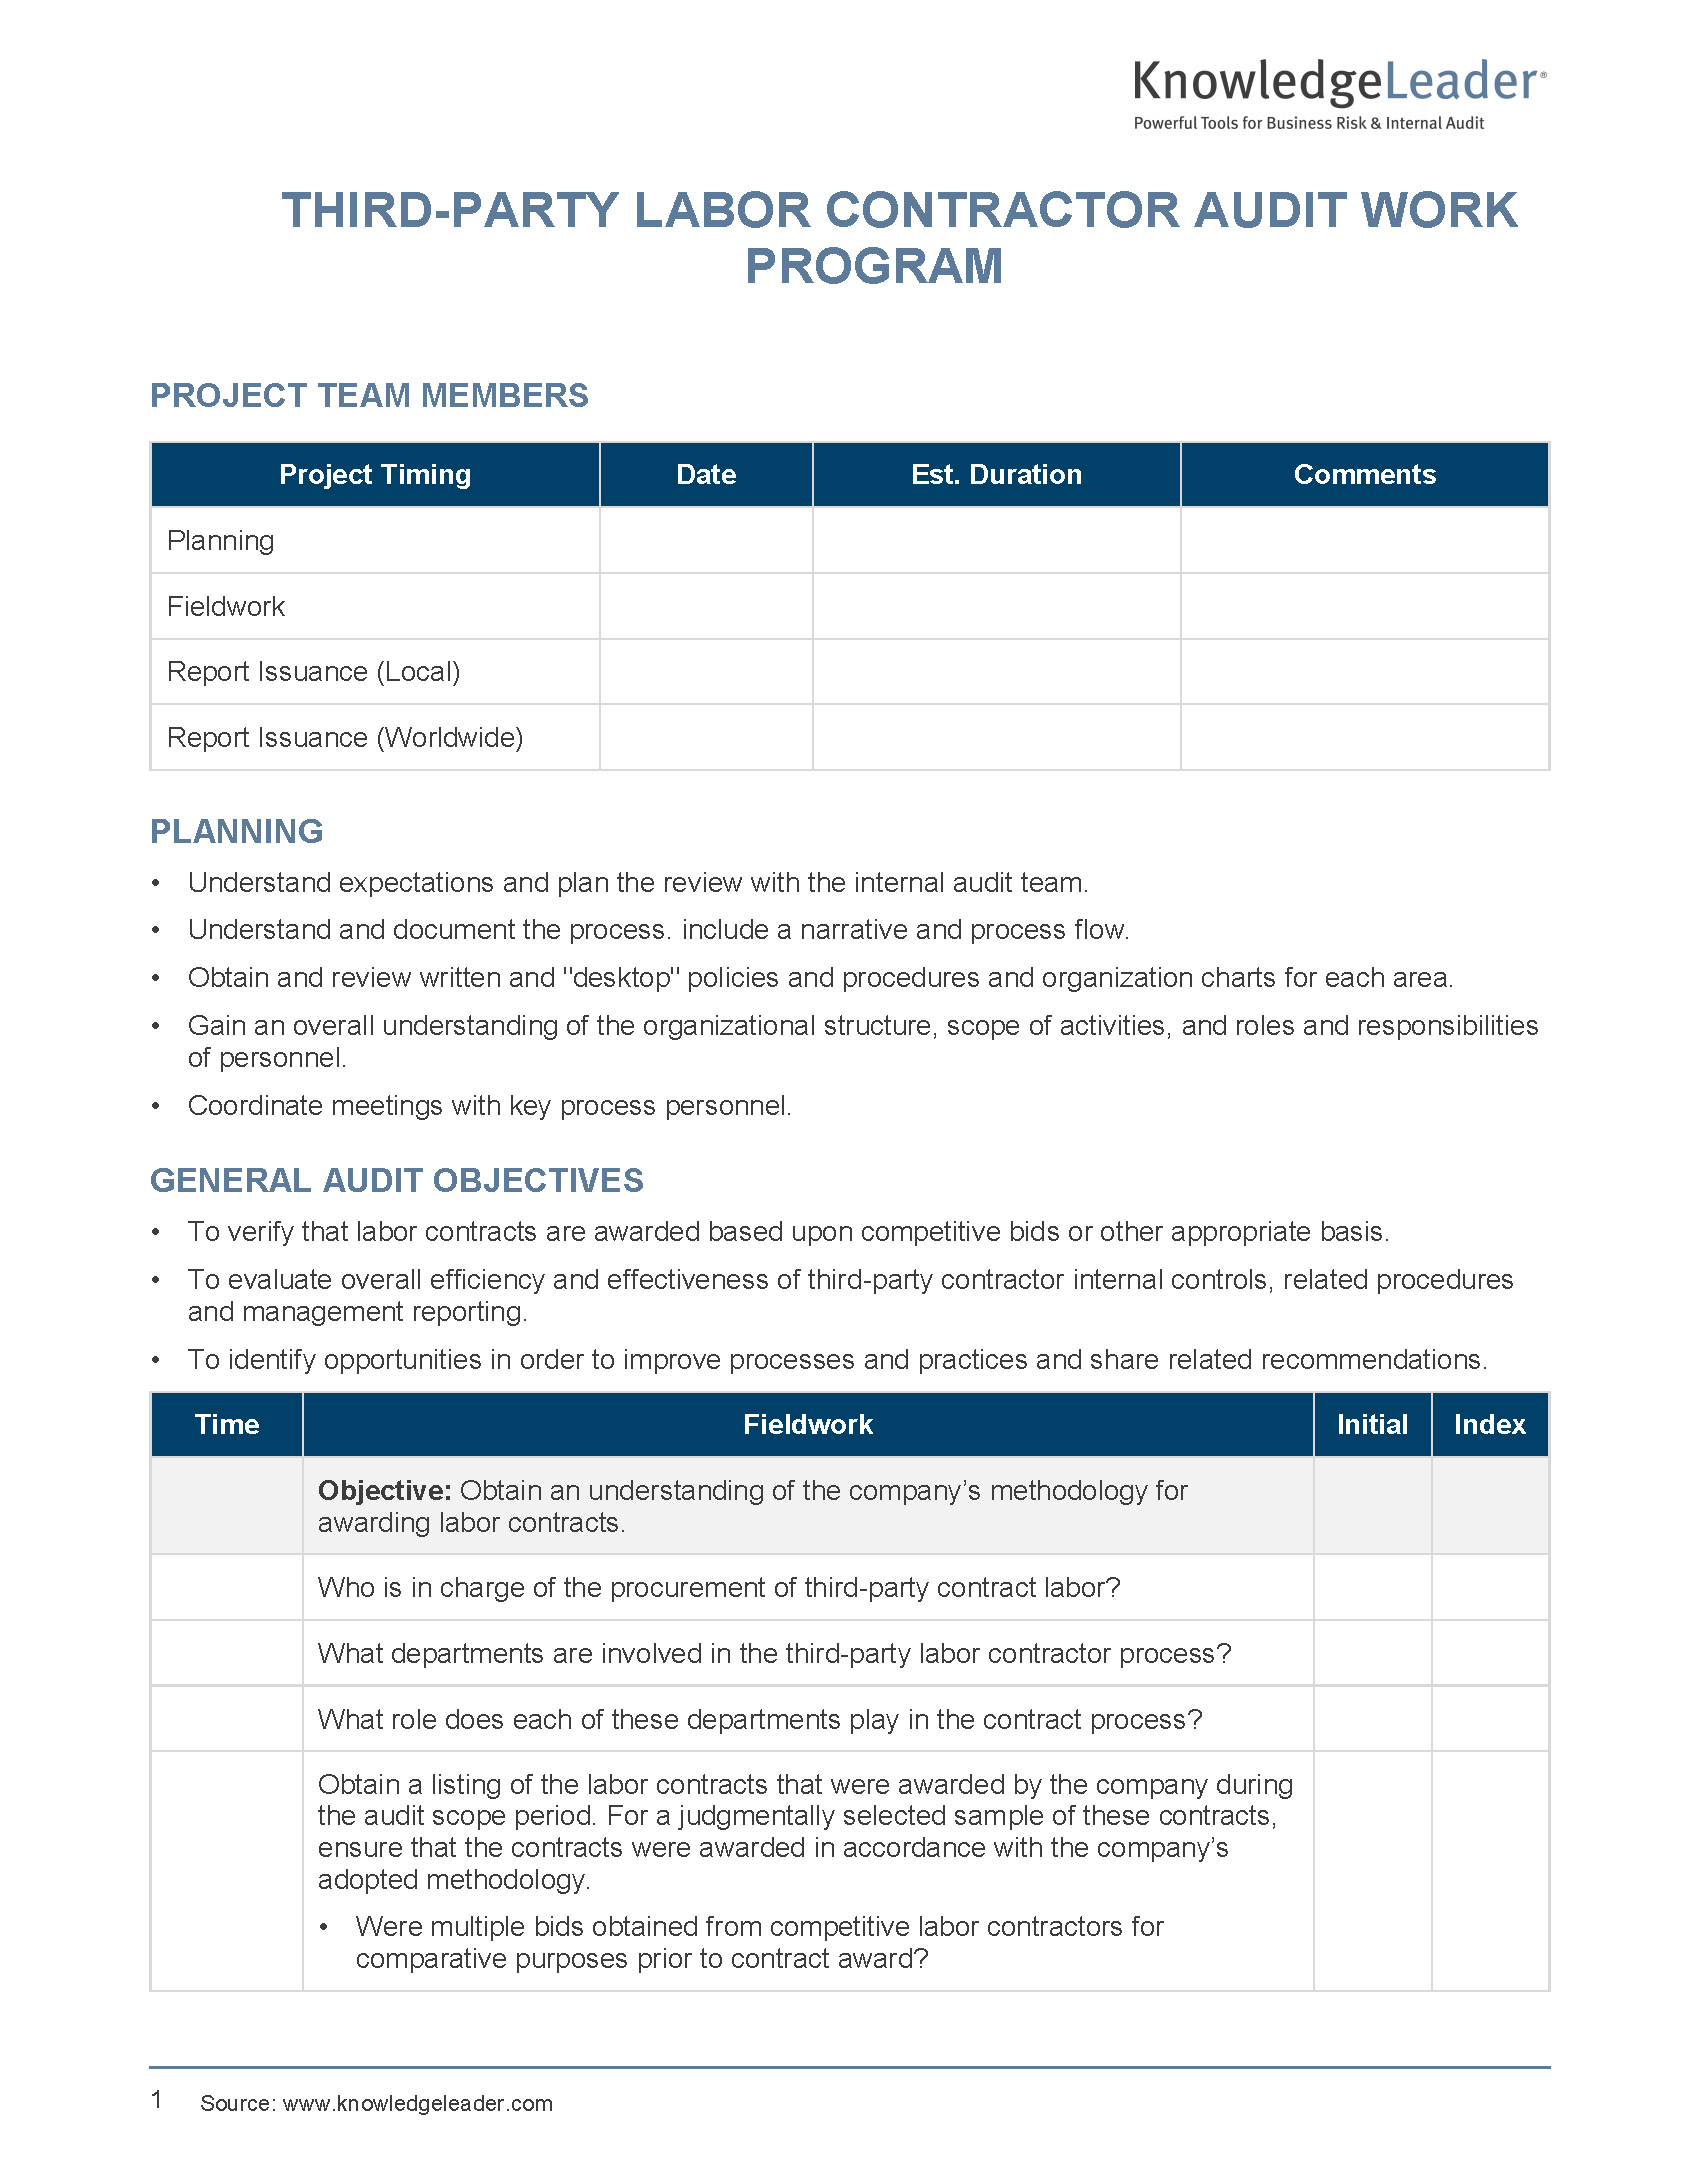 Screenshot of the first page of Third-Party Labor Contractor Audit Work Program